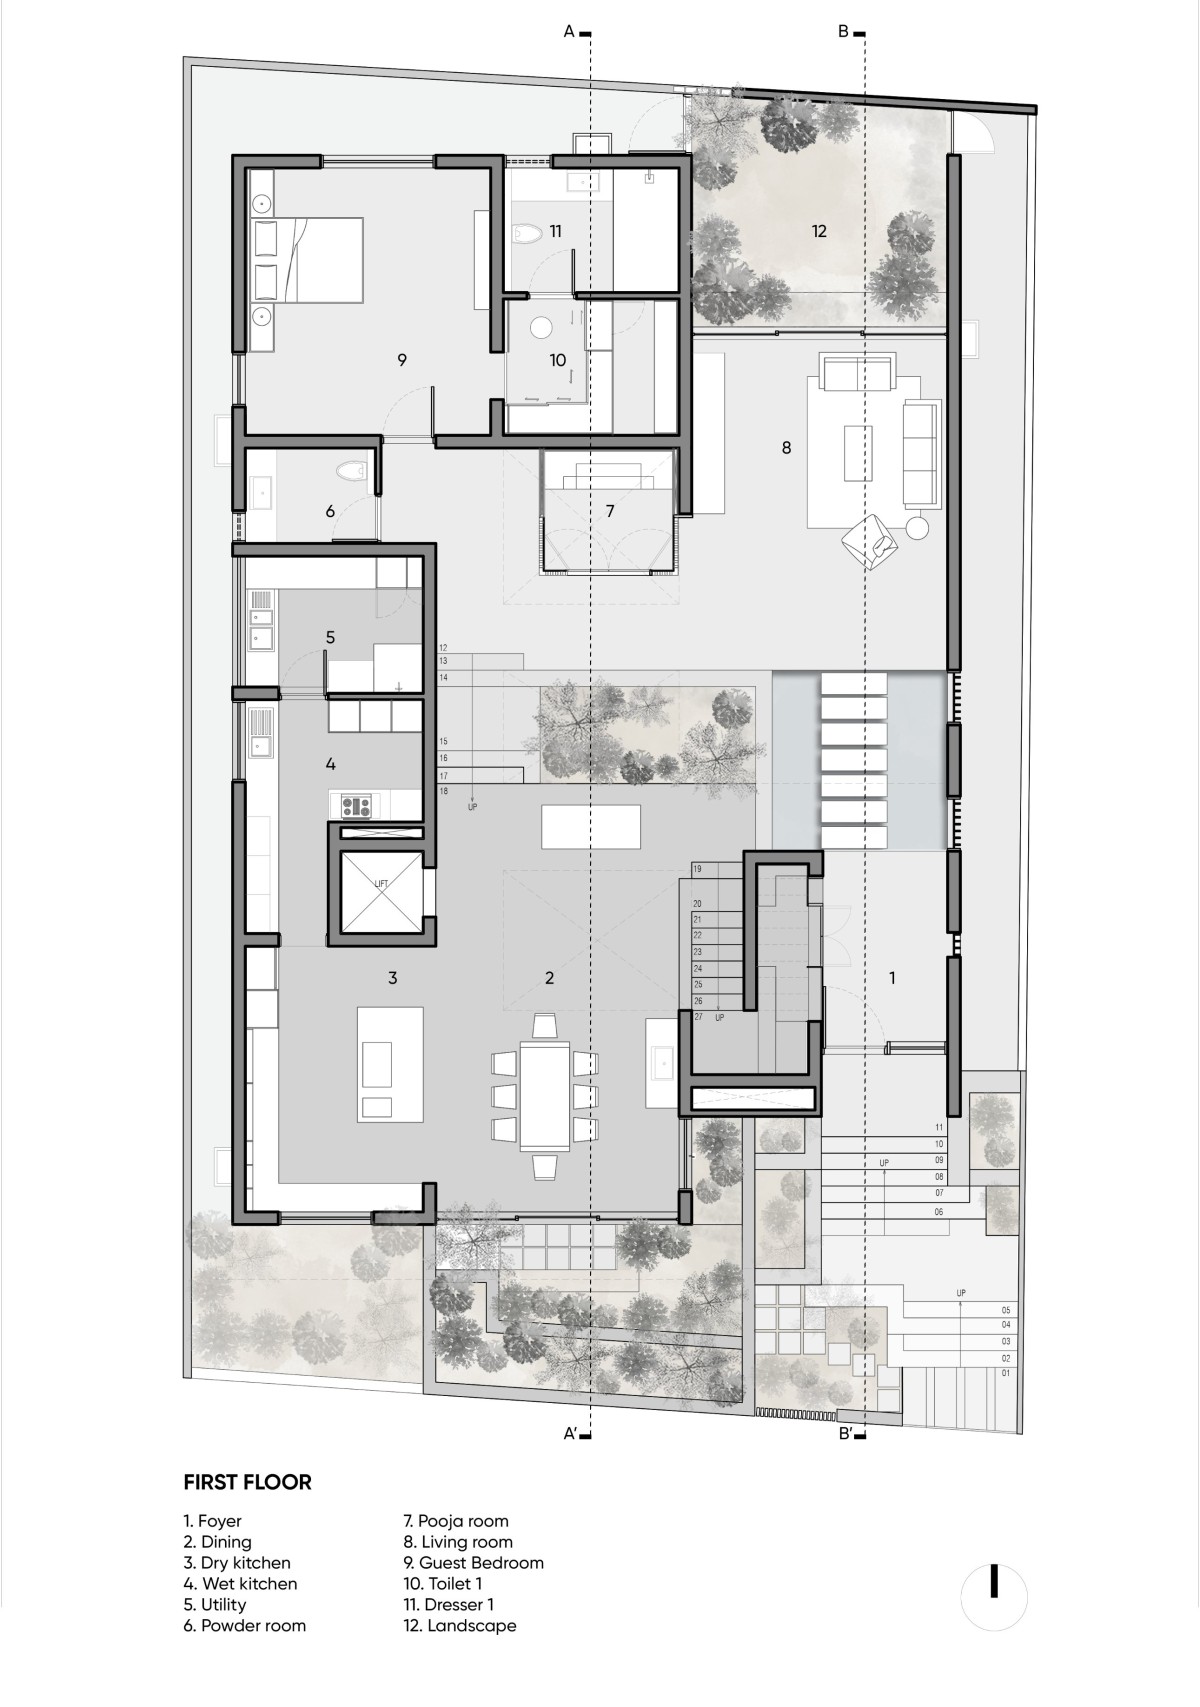 First floor plan of Janani House by Collage Architecture Studio